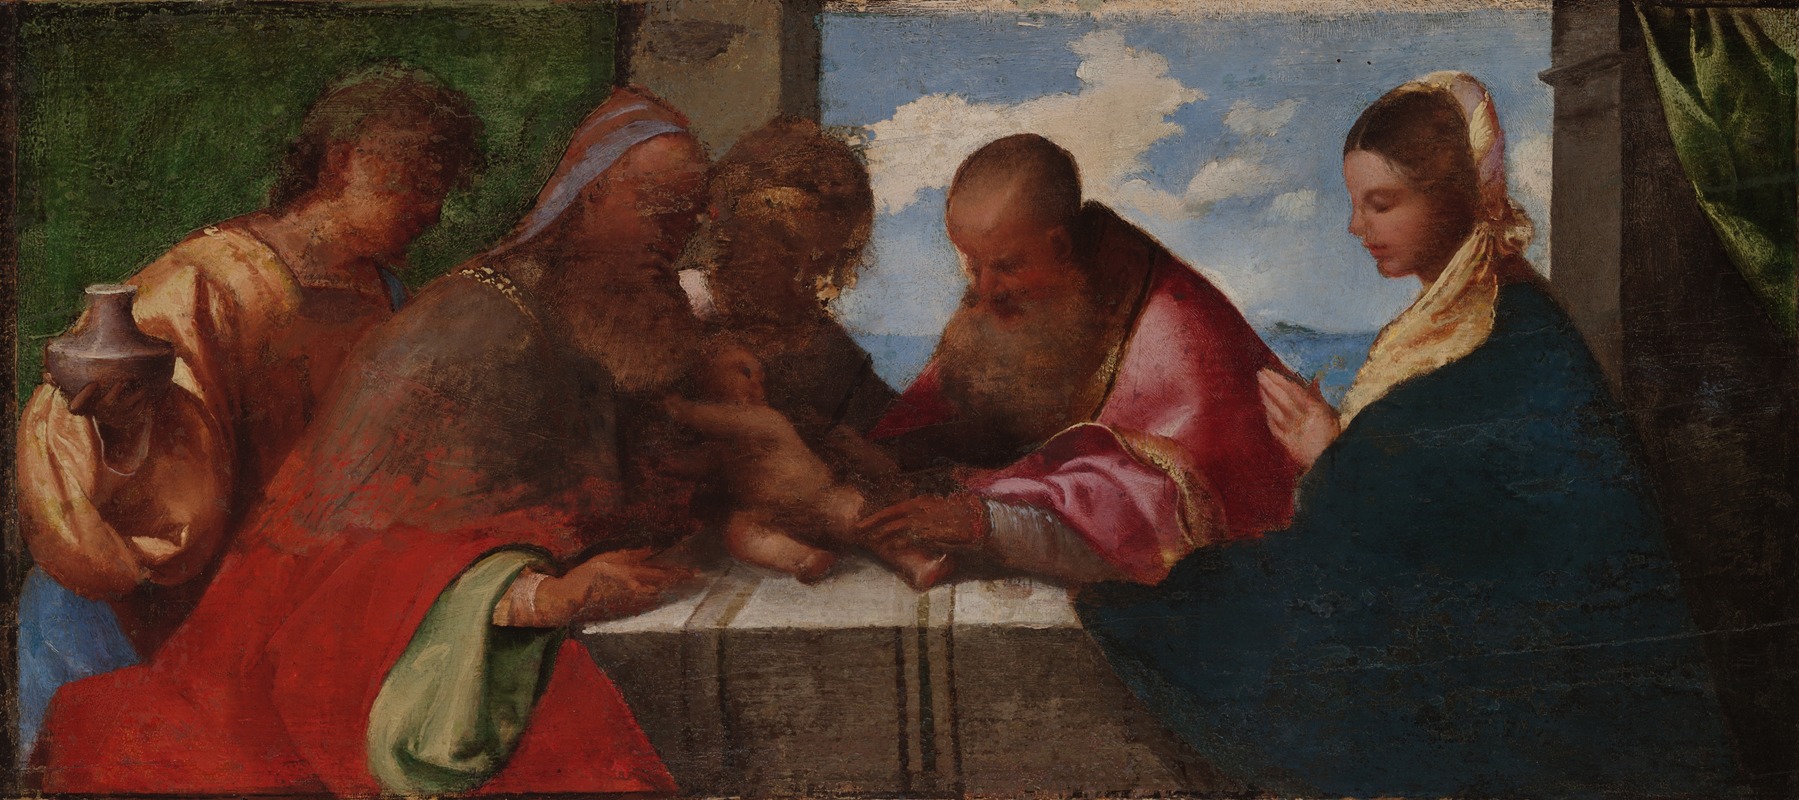 Titian - The Circumcision of Christ